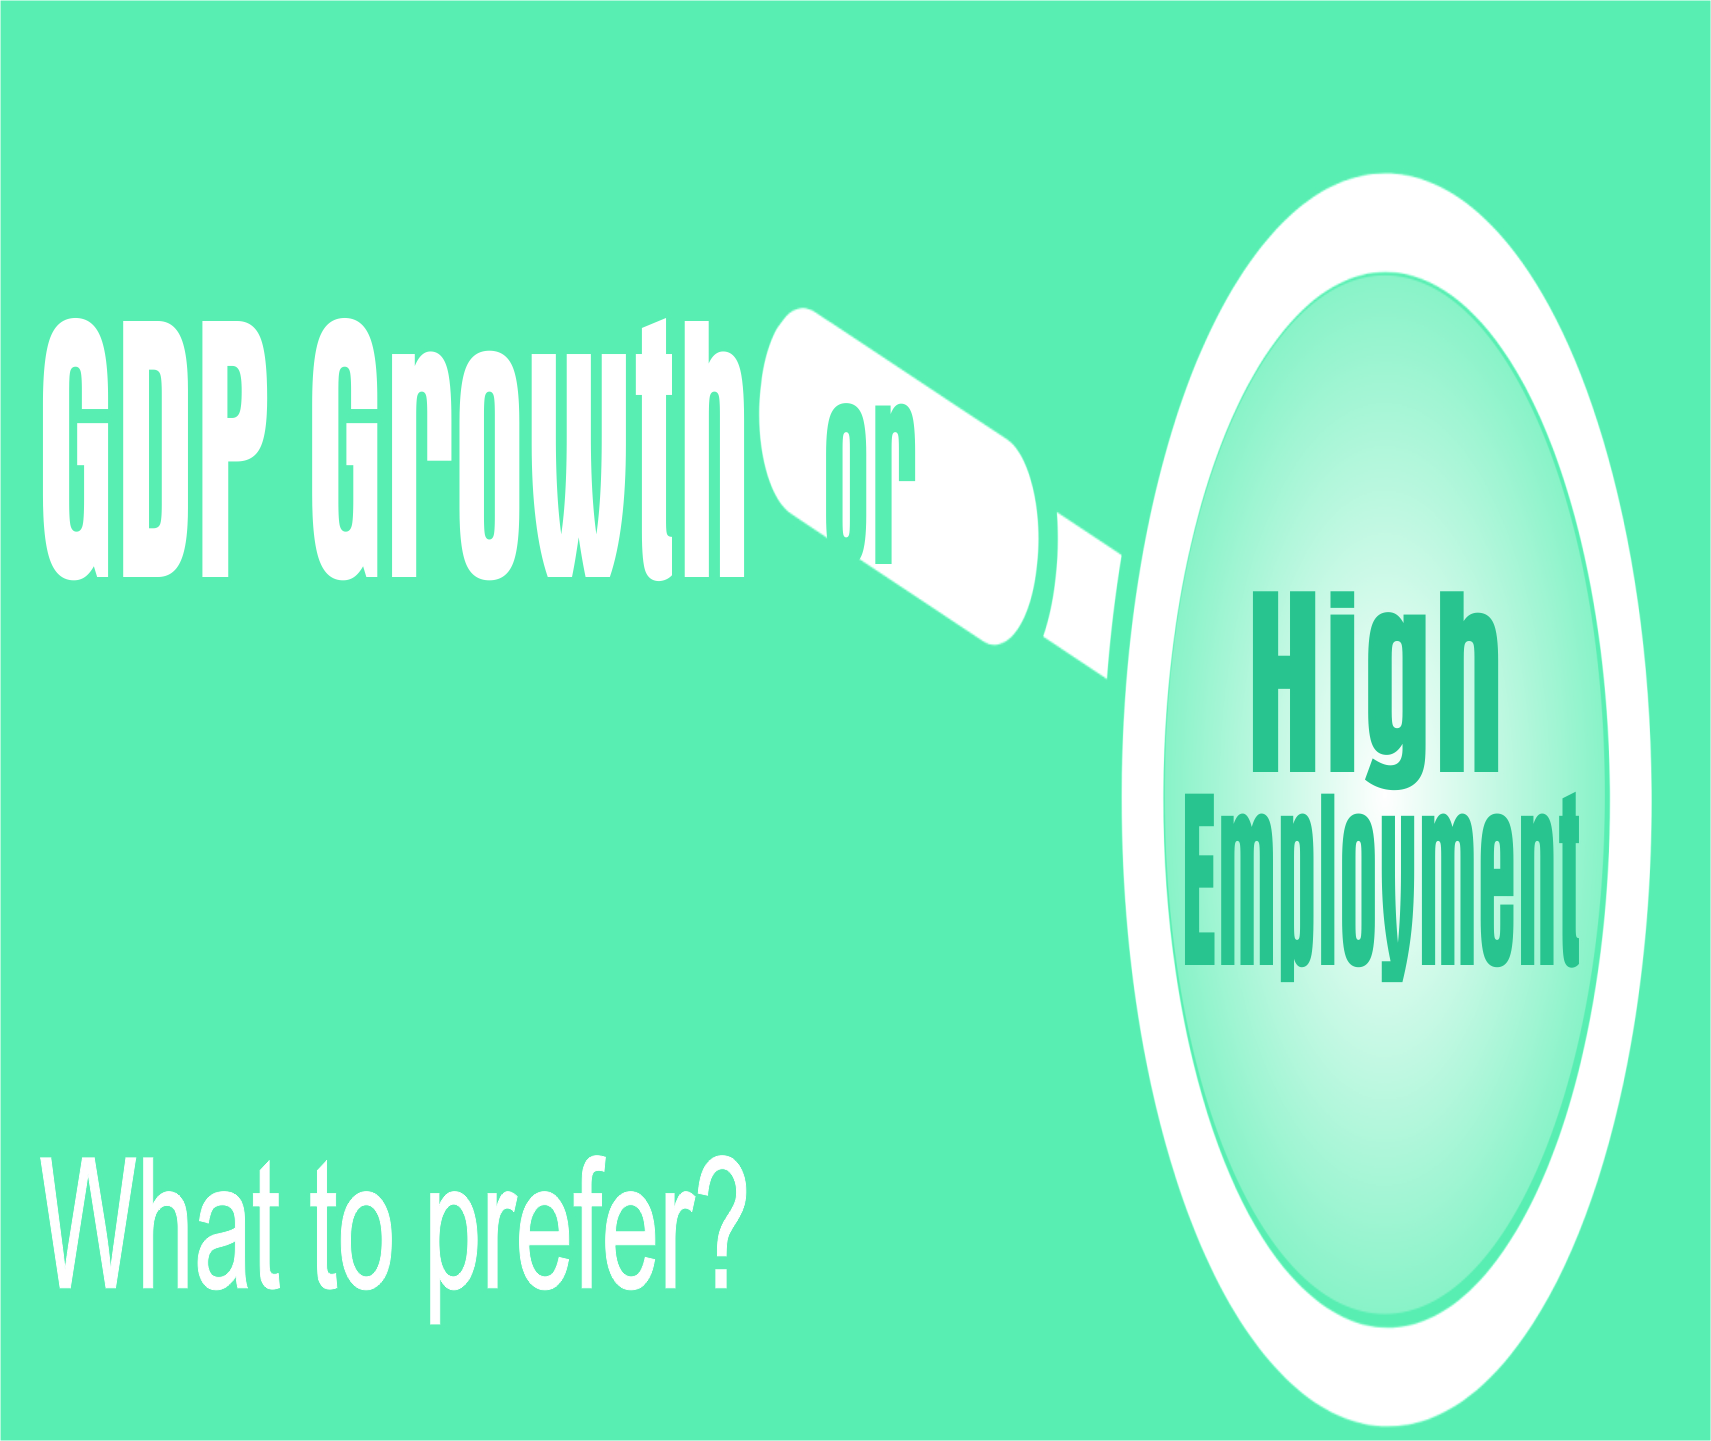 You are currently viewing GDP Growth or High Employment